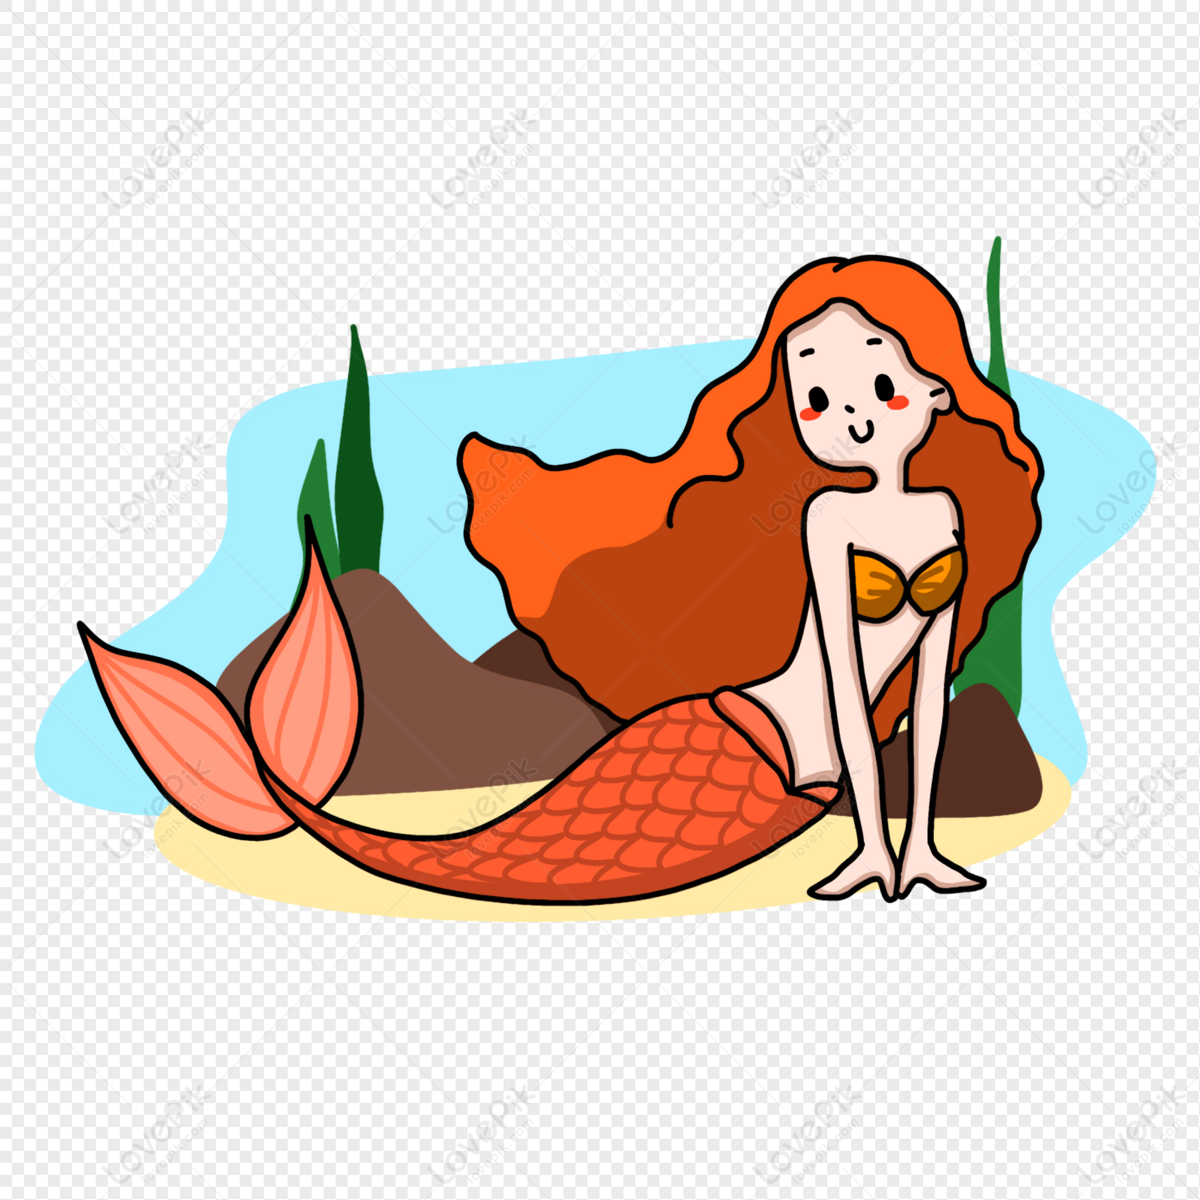 Cartoon Mermaid Under The Sea PNG Transparent Image And Clipart Image For  Free Download - Lovepik | 401459737